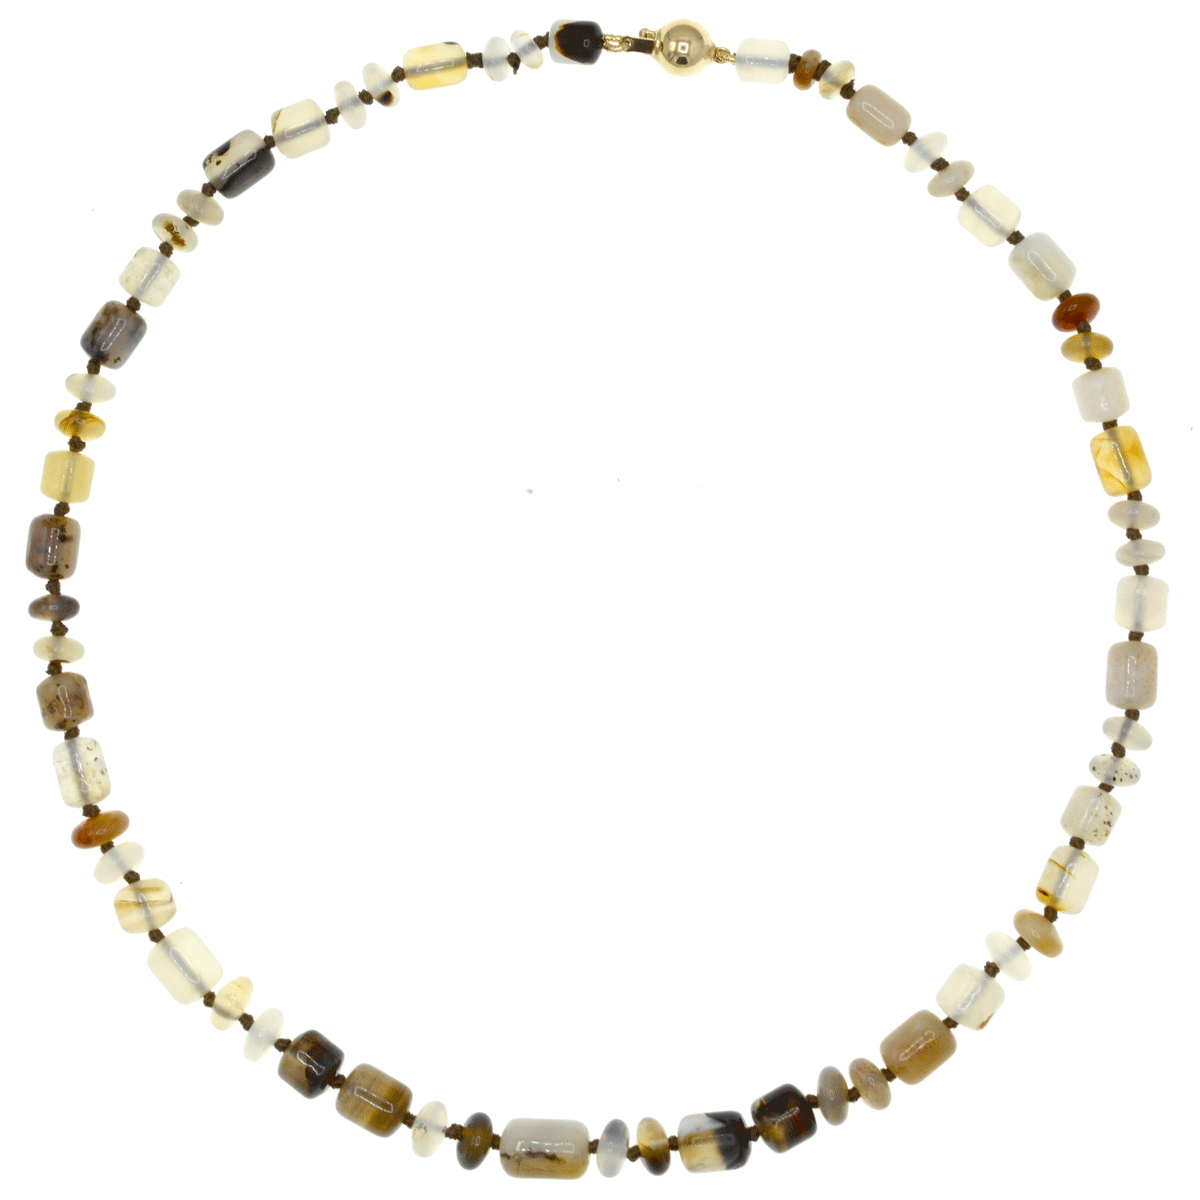 Beaded Speckled Agate Necklace